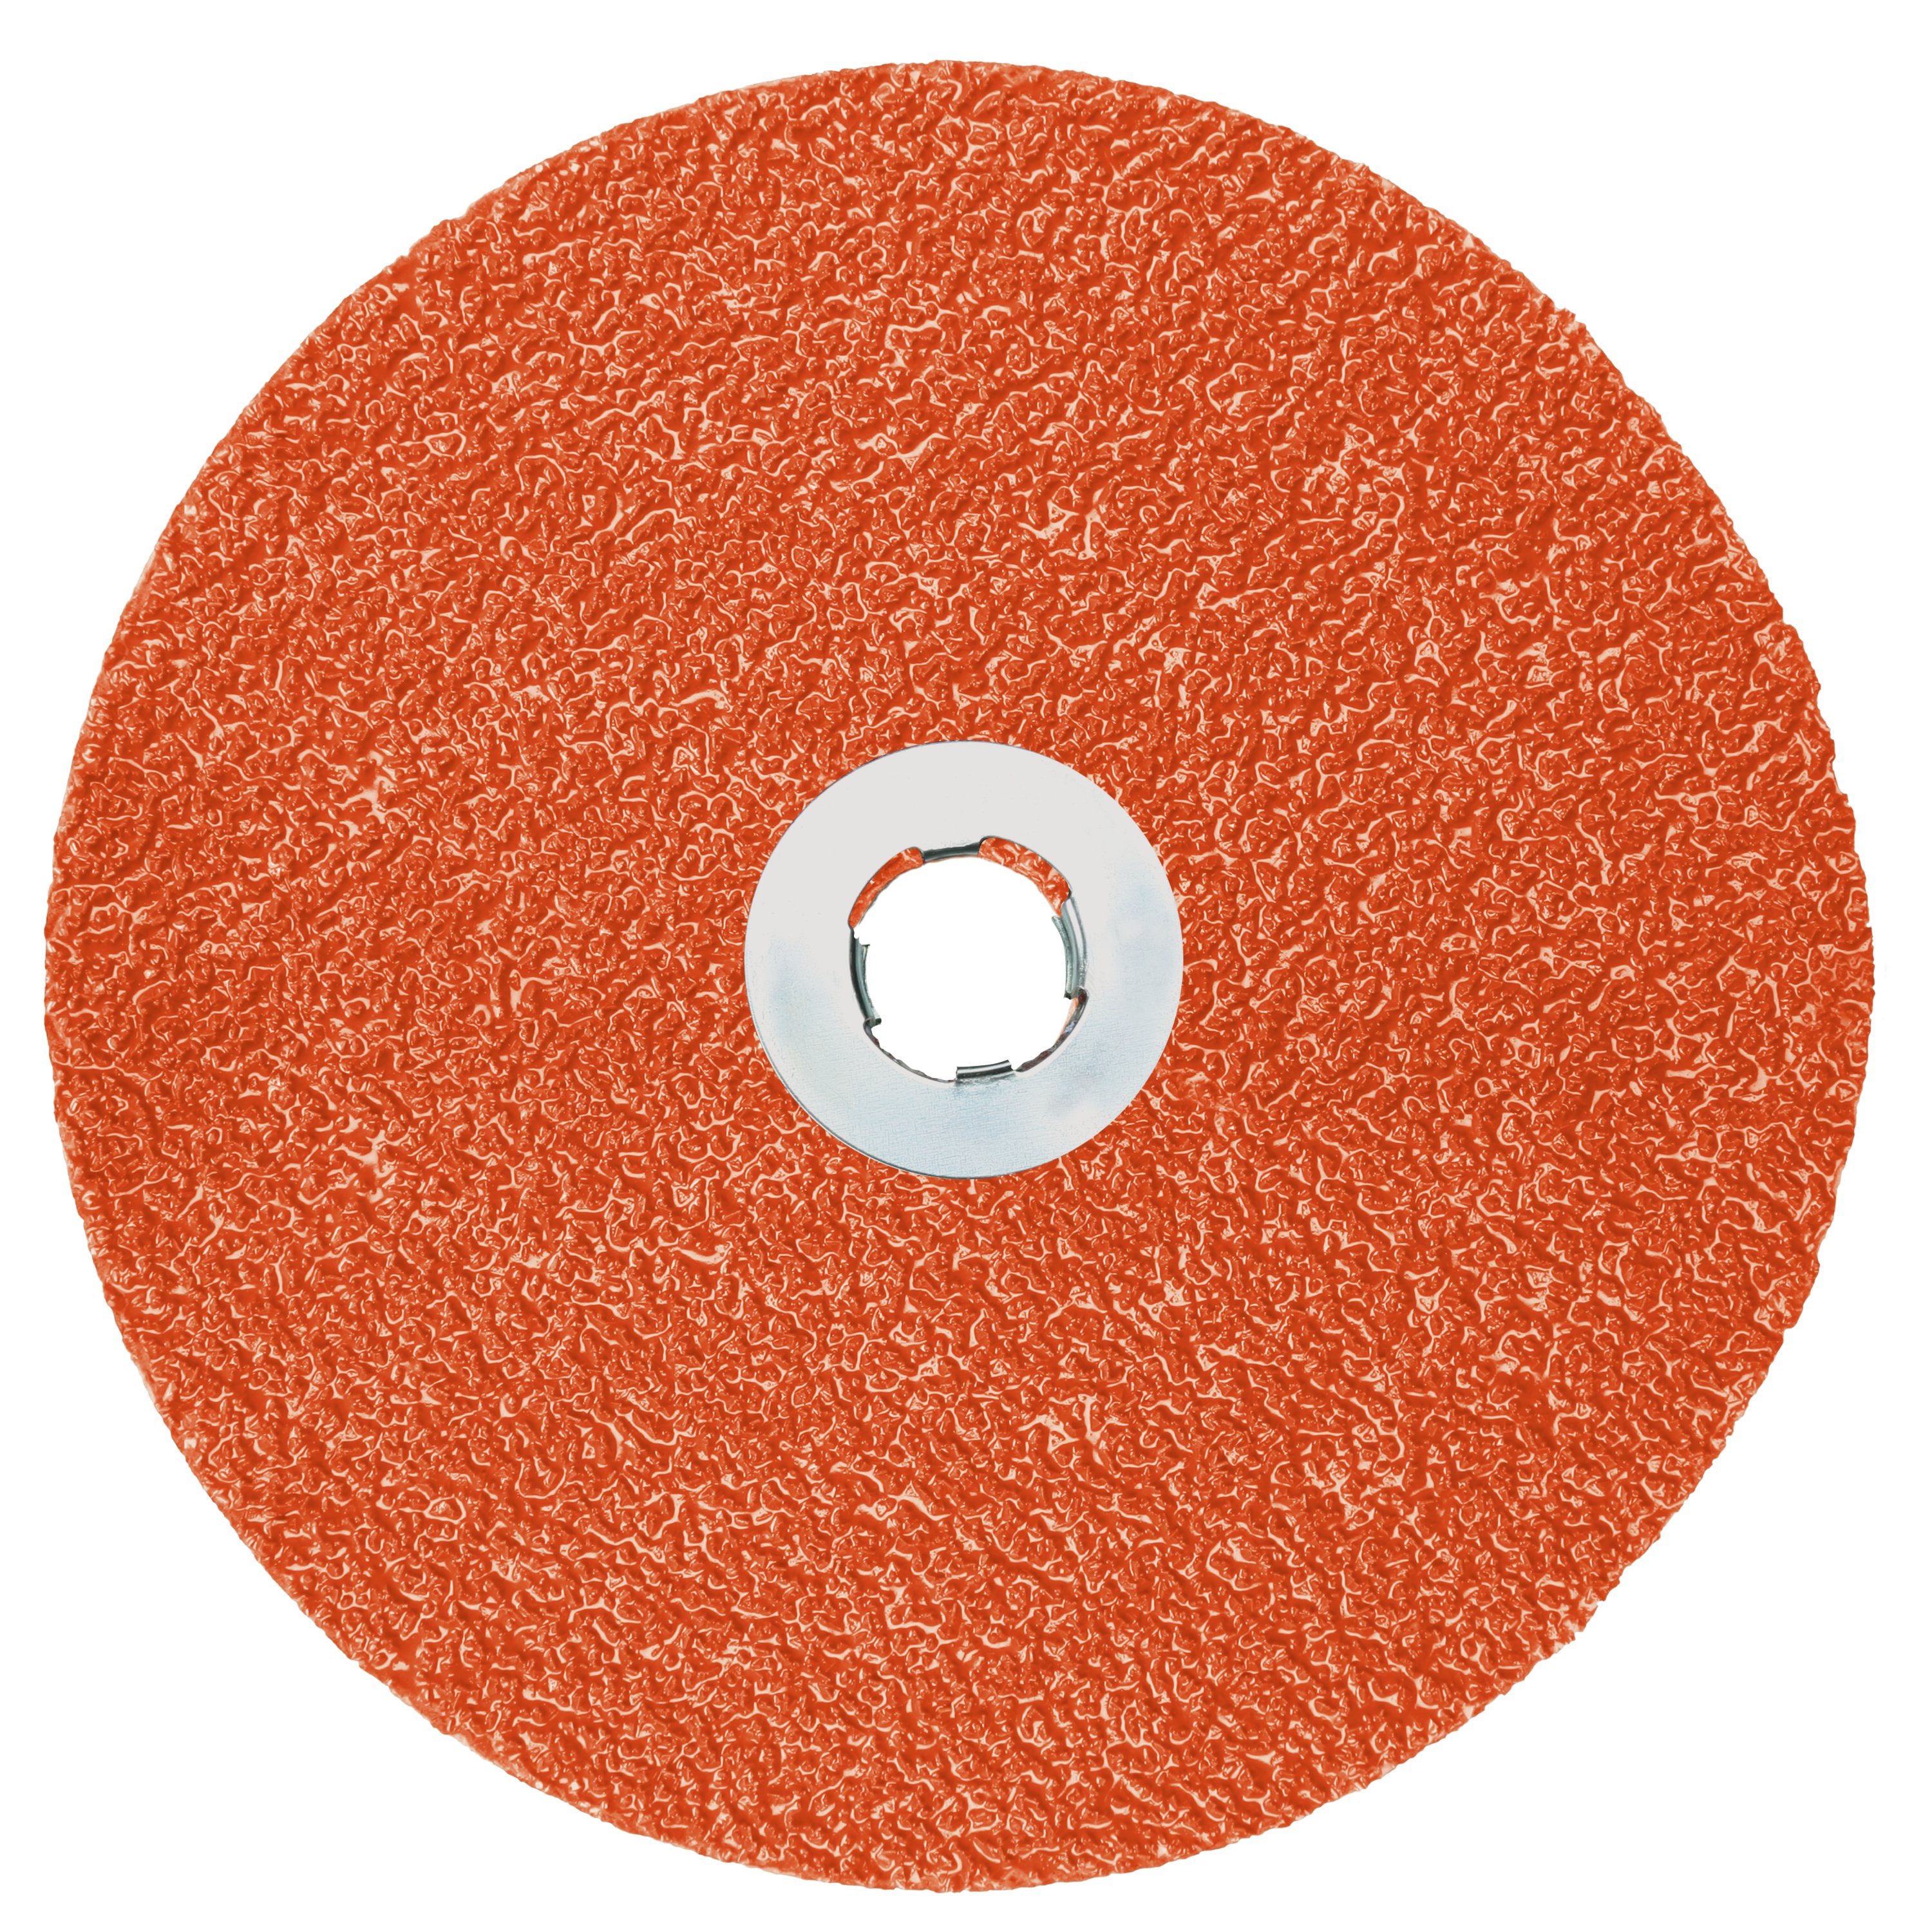 3M™ Fibre  Disc 787C contains the exact amount of precision shaped grain (PSG) you need to optimize the balance of speed and longevity for challenging applications from grinding to deburring.